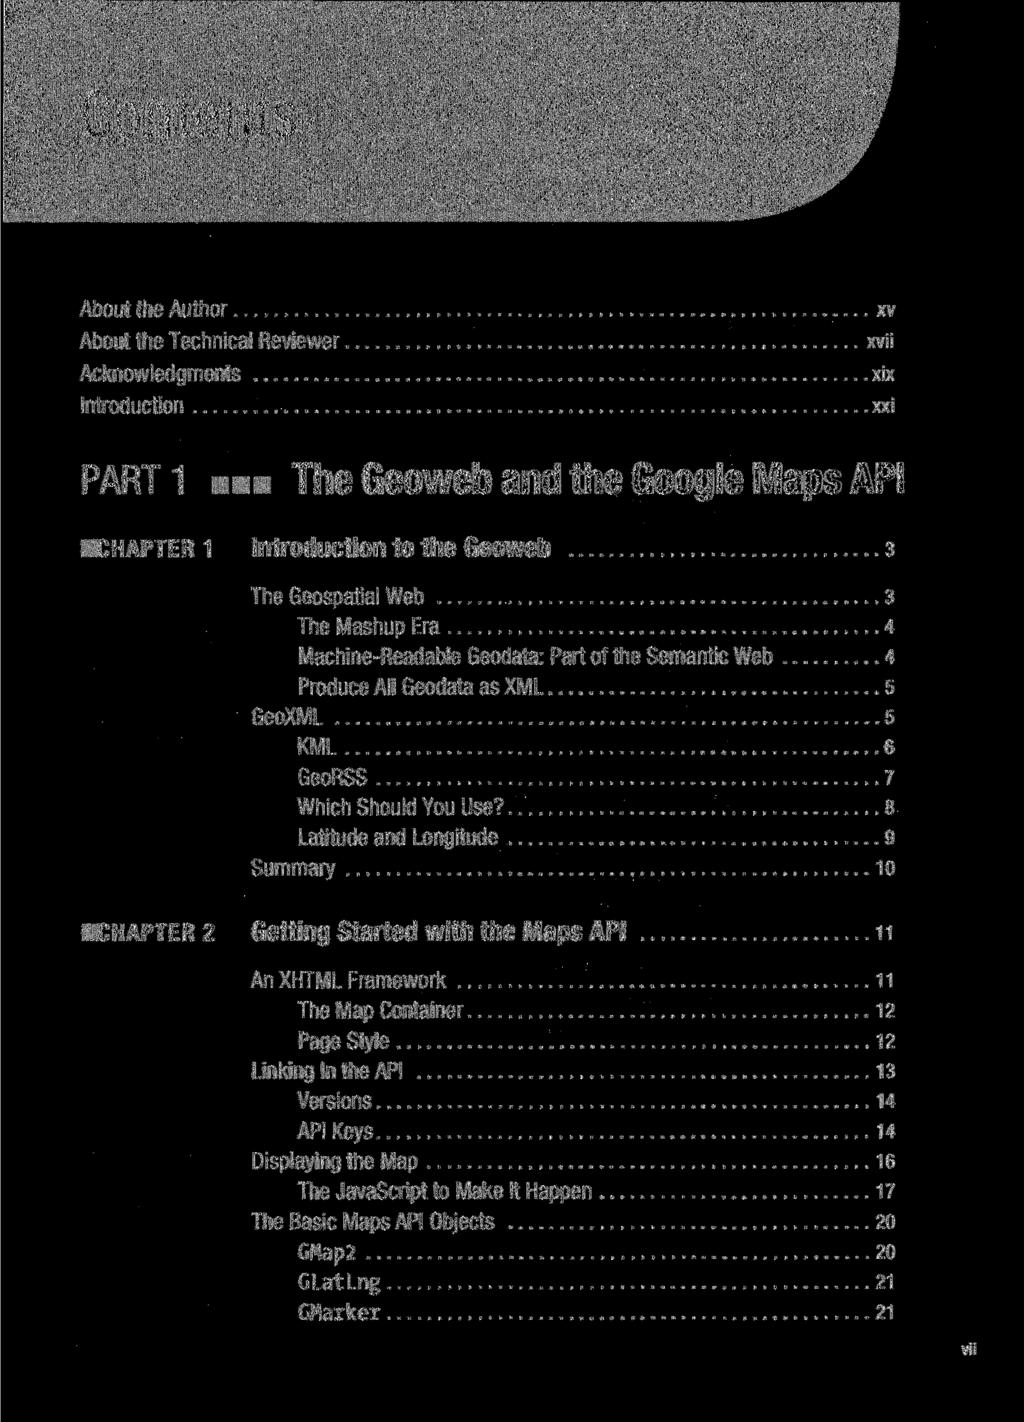 Contents About the Author About the Technical Reviewer Acknowledgments Introduction xv xvii xix xxi PART 1 The Geoweb and the Google Maps API CHAPTER 1 Introduction to the Geoweb з The Geospatial Web